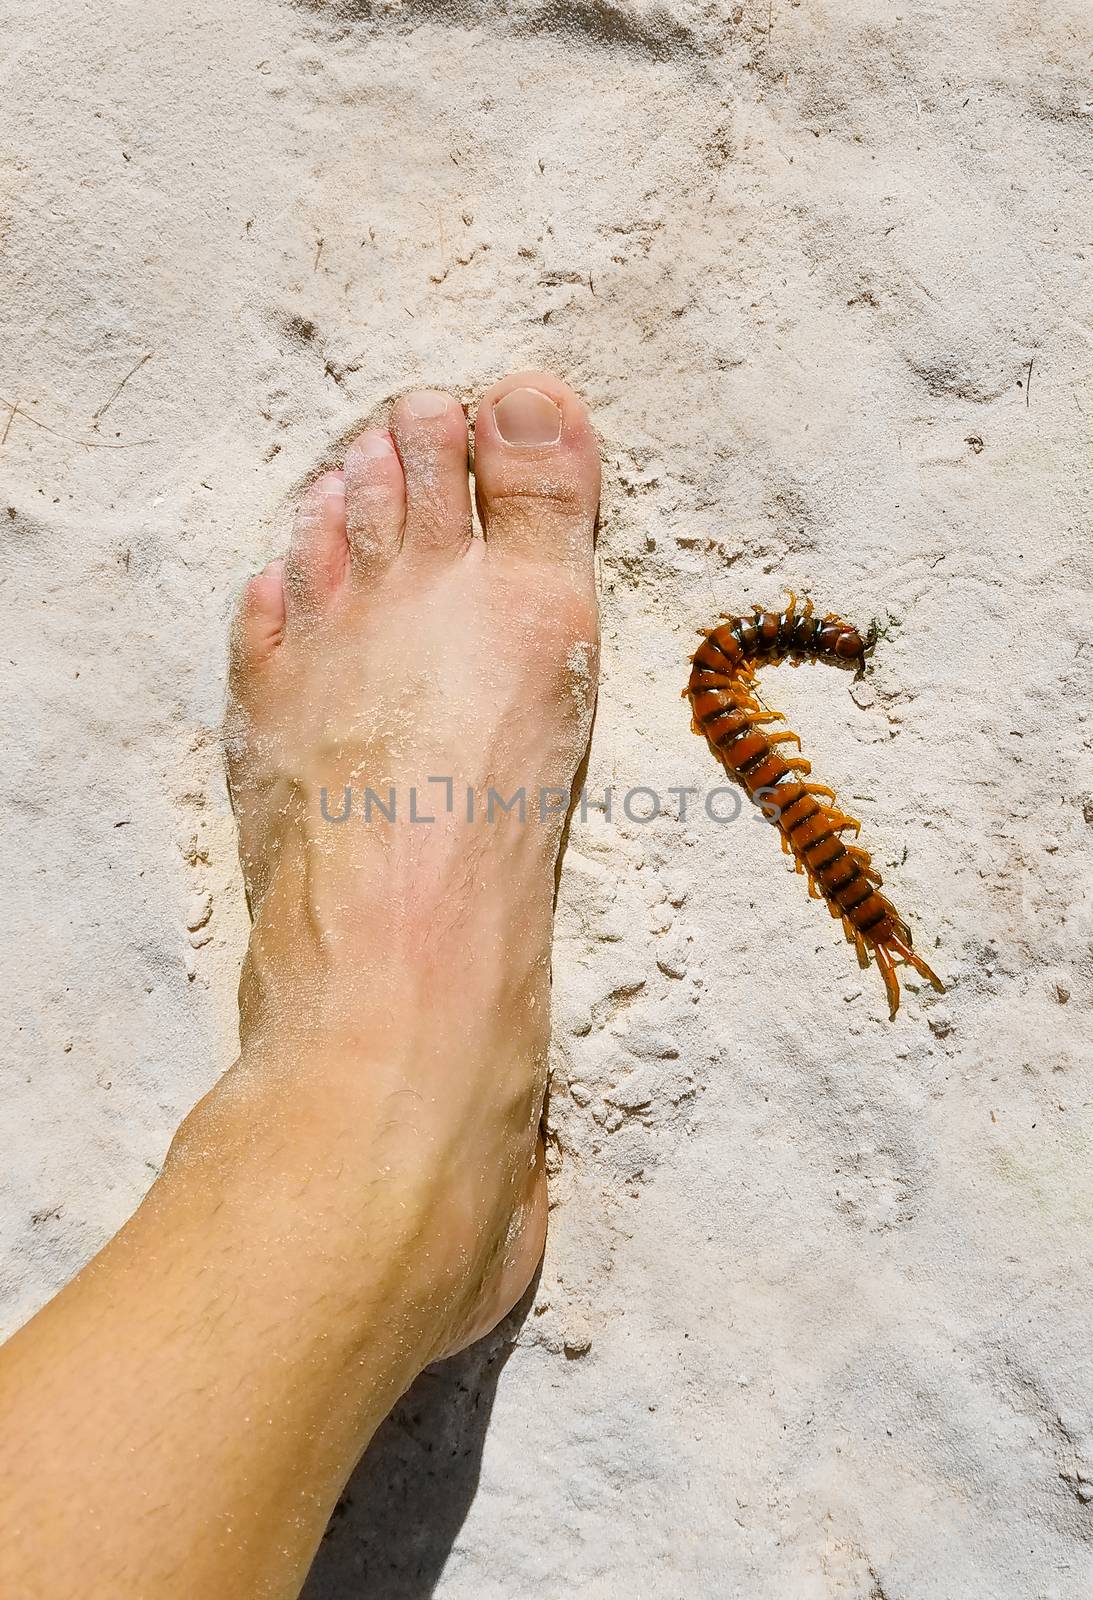 Peruvian giant yellow-leg centipede, or or Amazonian giant centipede, Scolopendra gigantea, compared to a man's foot size 10.5 US, or 43 EU, or 10 UK.